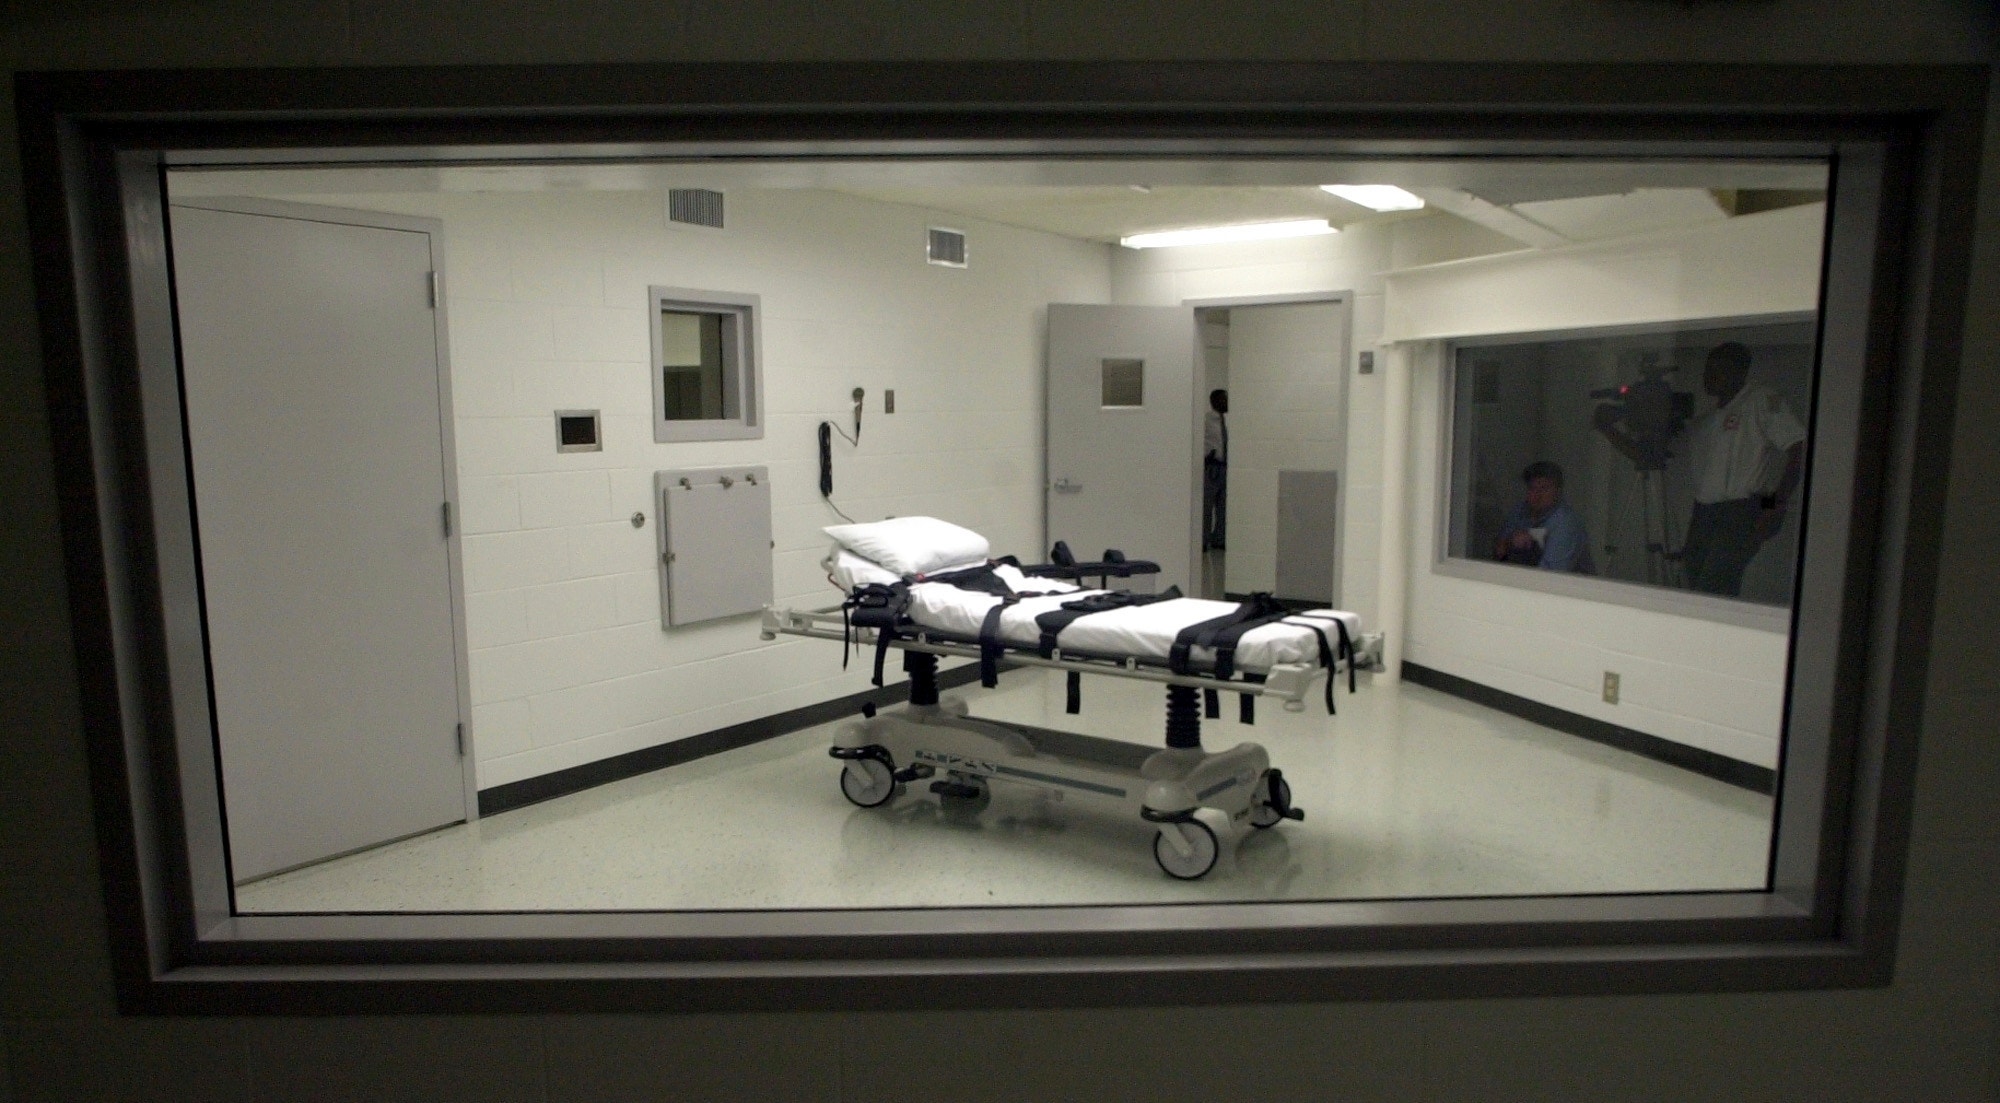 South Carolina obtains lethal injection drugs to carry out death penalty again after decade-long hiatus